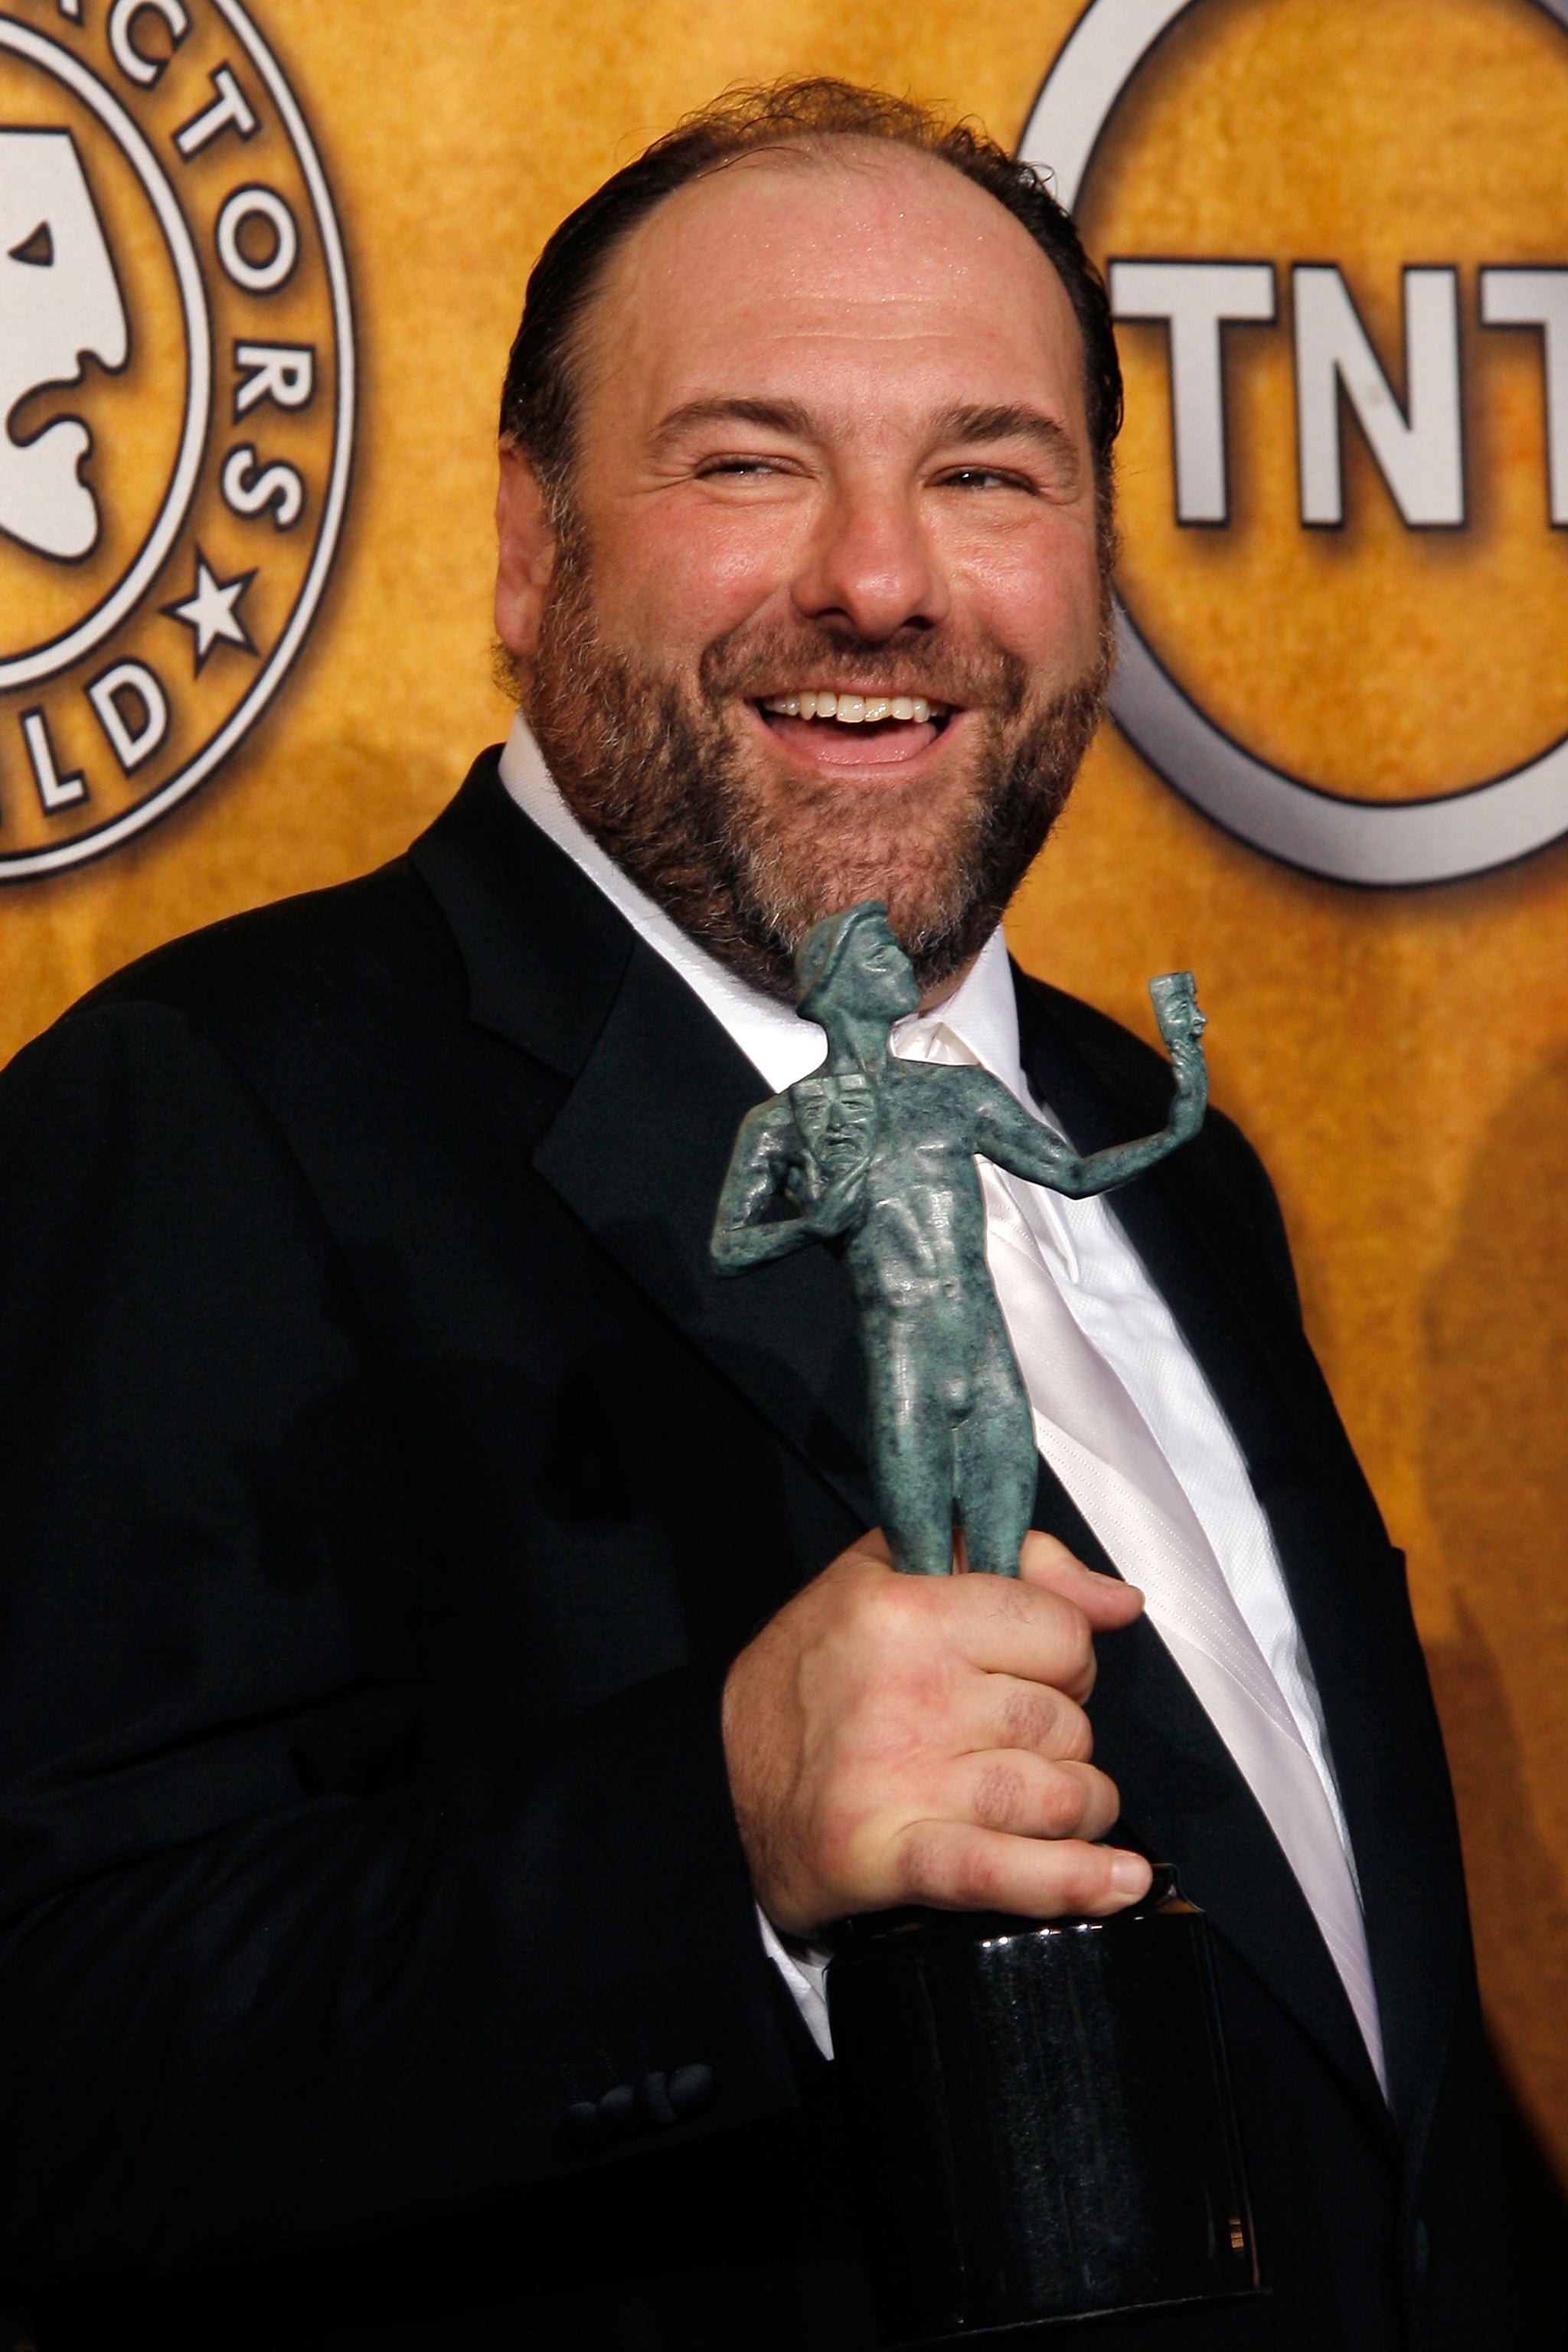 James Gandolfini poses with his Screen Actors Guild Award for Outstanding Performance by a Male Actor in a Drama Series for 'The Sopranos,' 2008